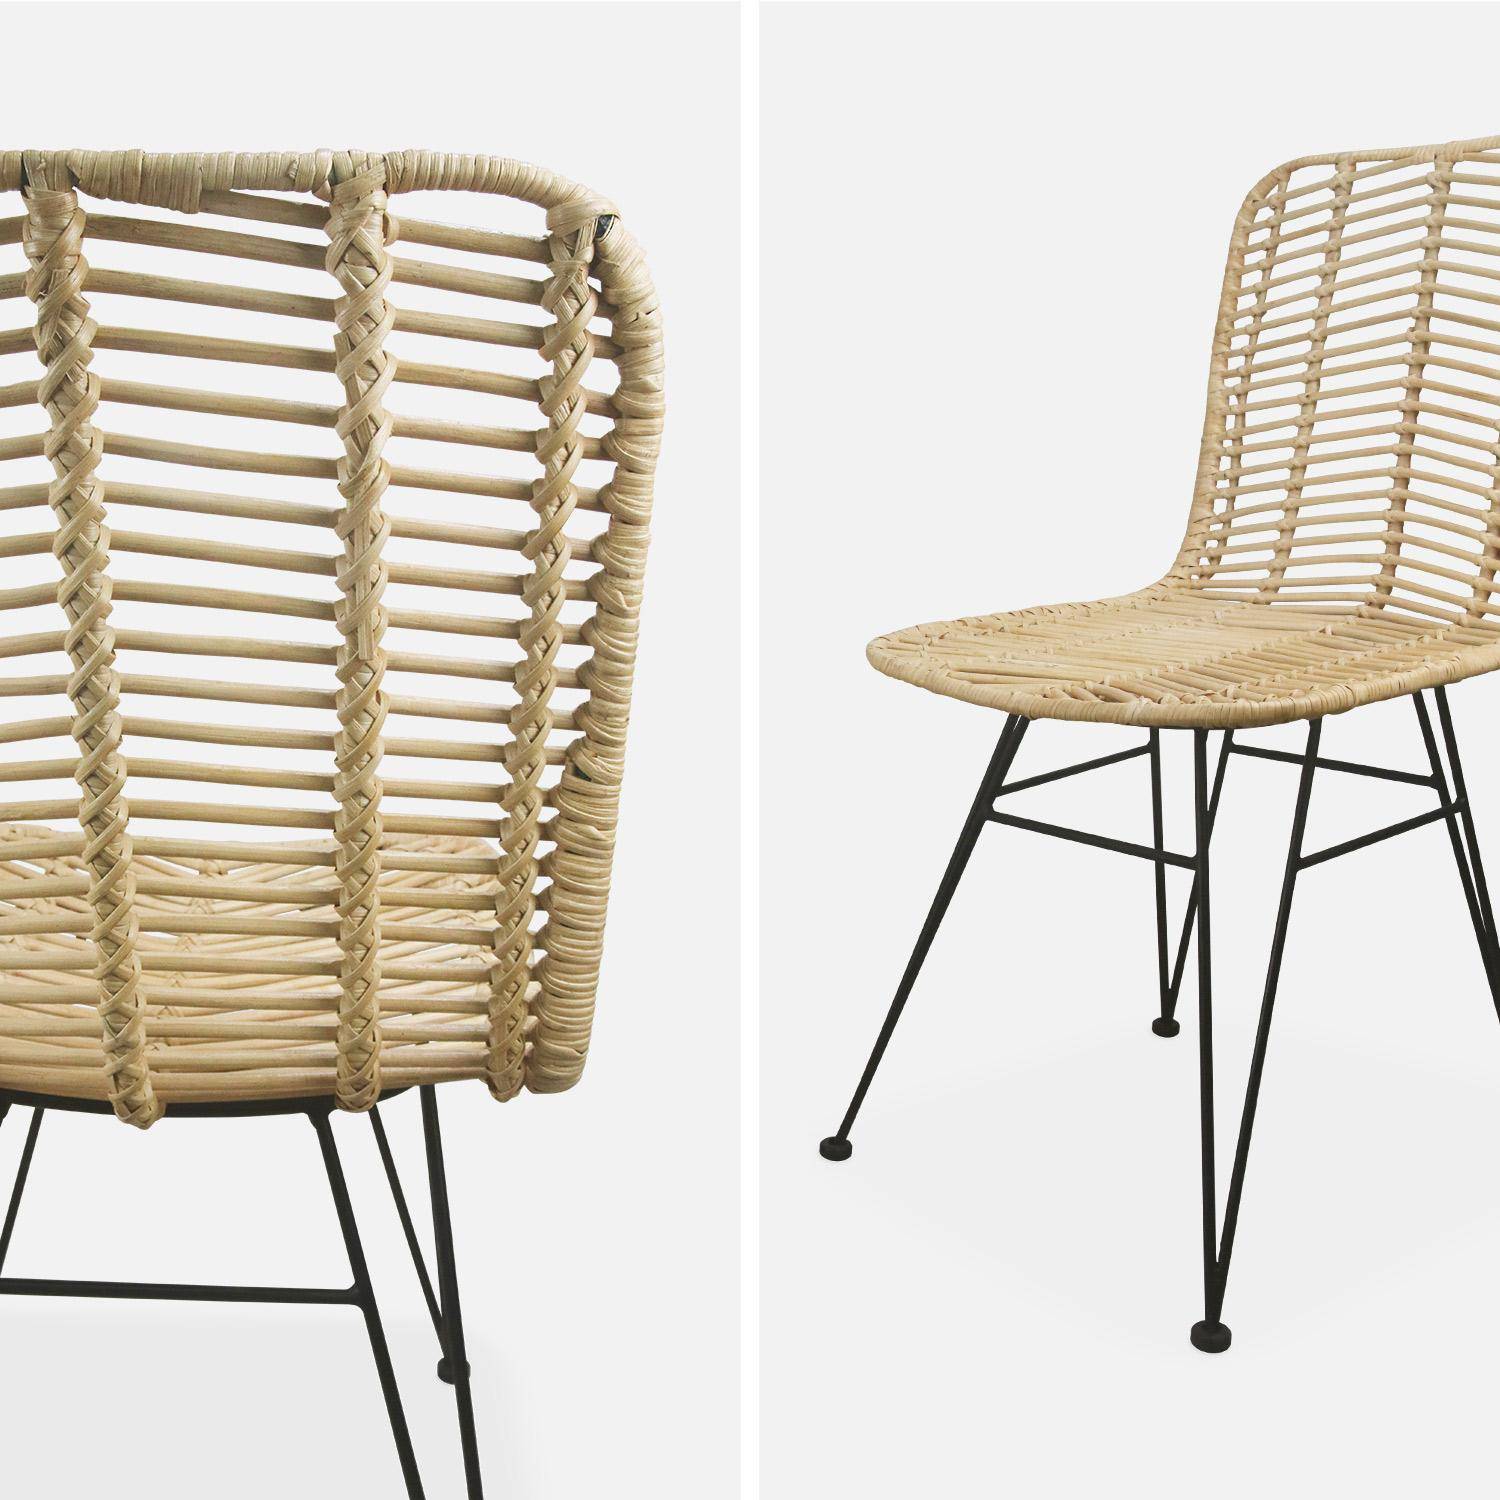 Pair of high-backed rattan dining chairs with metal legs and cushions - Cahya - Natural rattan, White cushions Photo8